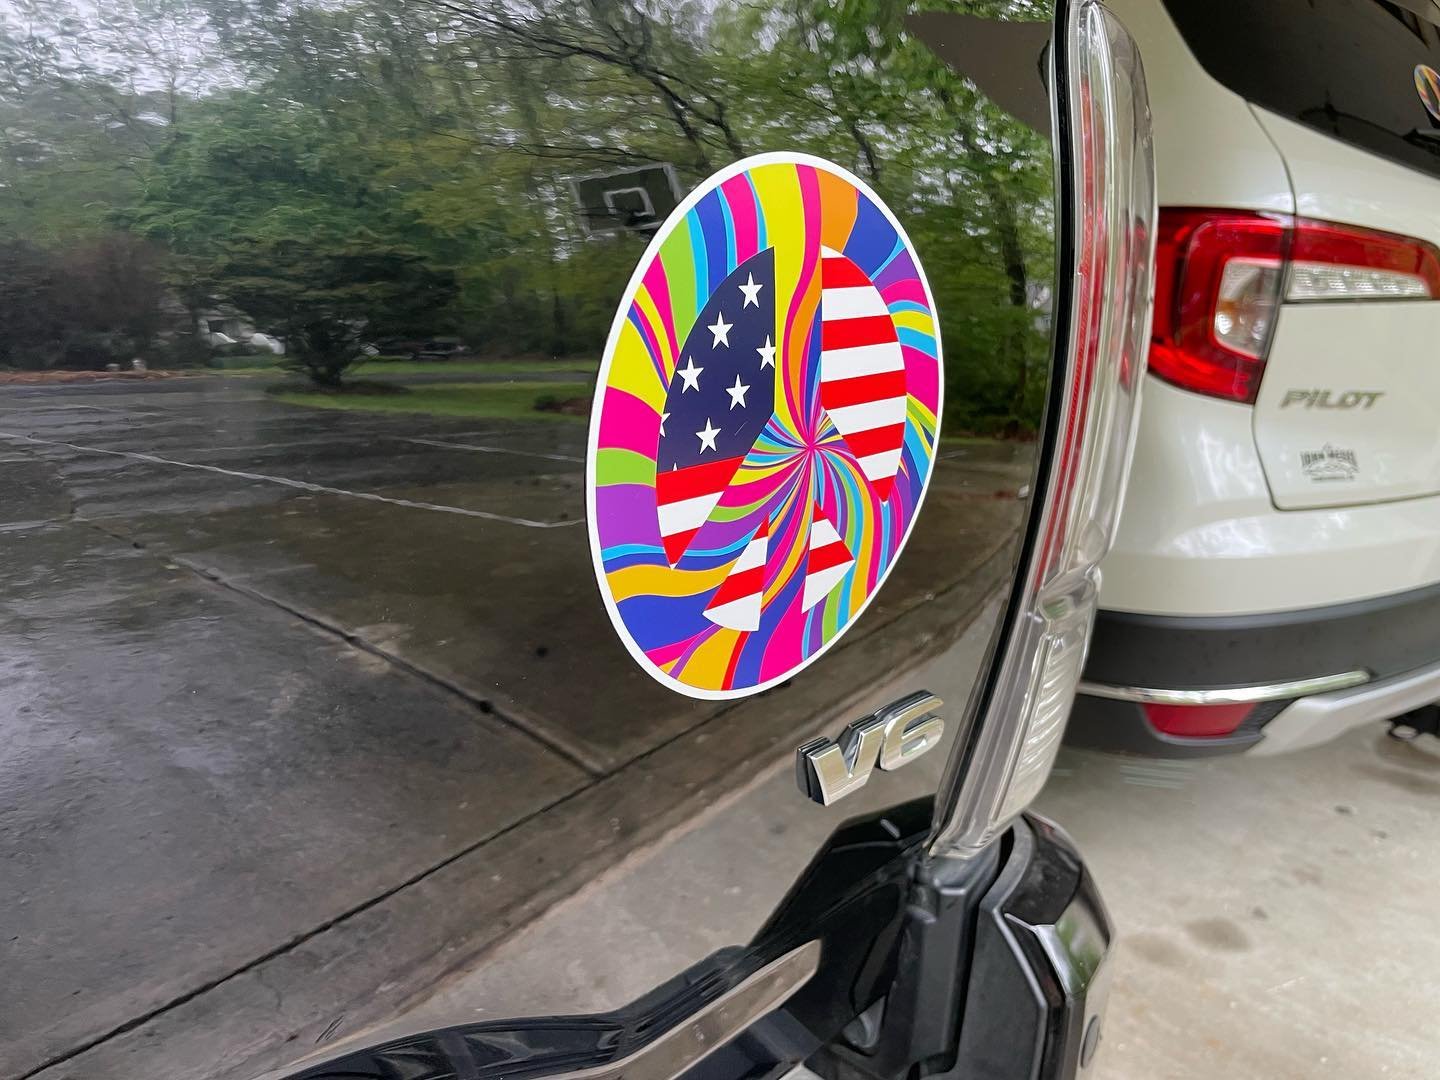 Peace Sign car magnets for sale! They are 6&rdquo; and stick well. $10 and we have Cash App &amp; Venmo. They are easily mailed too. Hope you dig them✌🏻☮️#carmagents #peacesign #patriotic